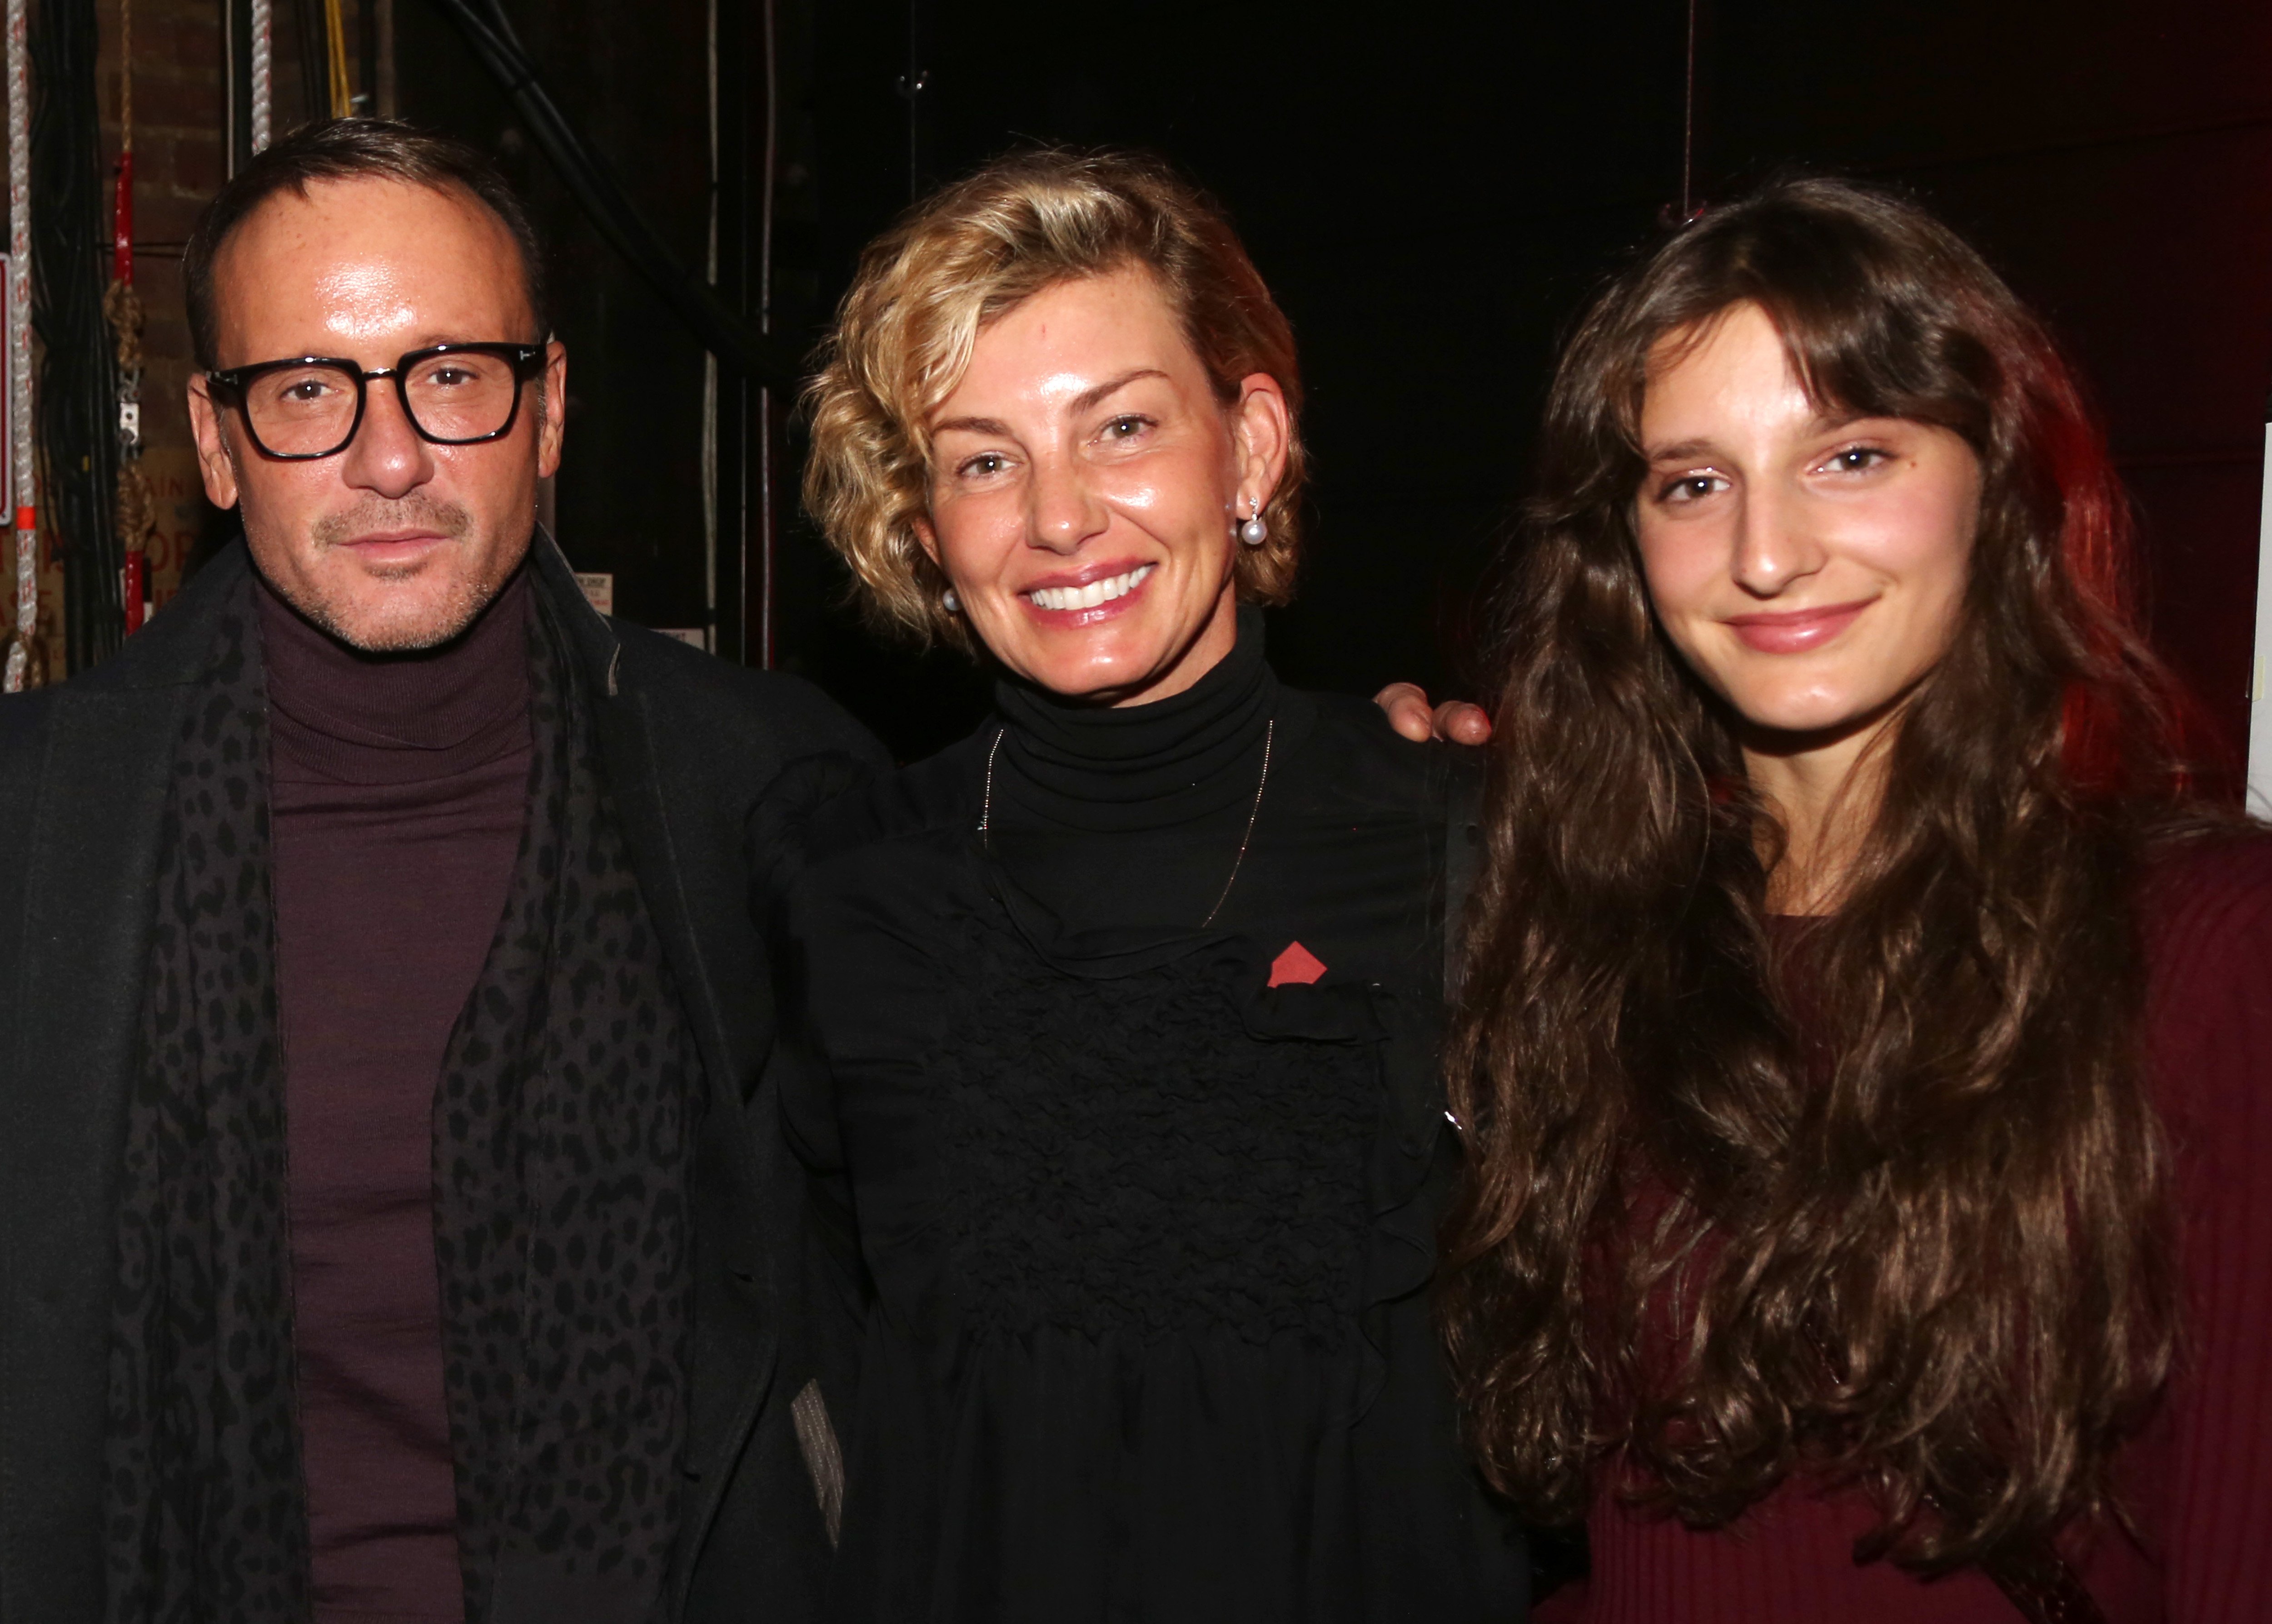 Tim McGraw, wife Faith Hill and daughter Audrey Caroline McGraw pose backstage at the hit musical based on the Baz Luhrmann film "Moulin Rouge!" on Broadway at The Al Hirshfeld Theatre on January 18, 2020 in New York City | Source: Getty Images 